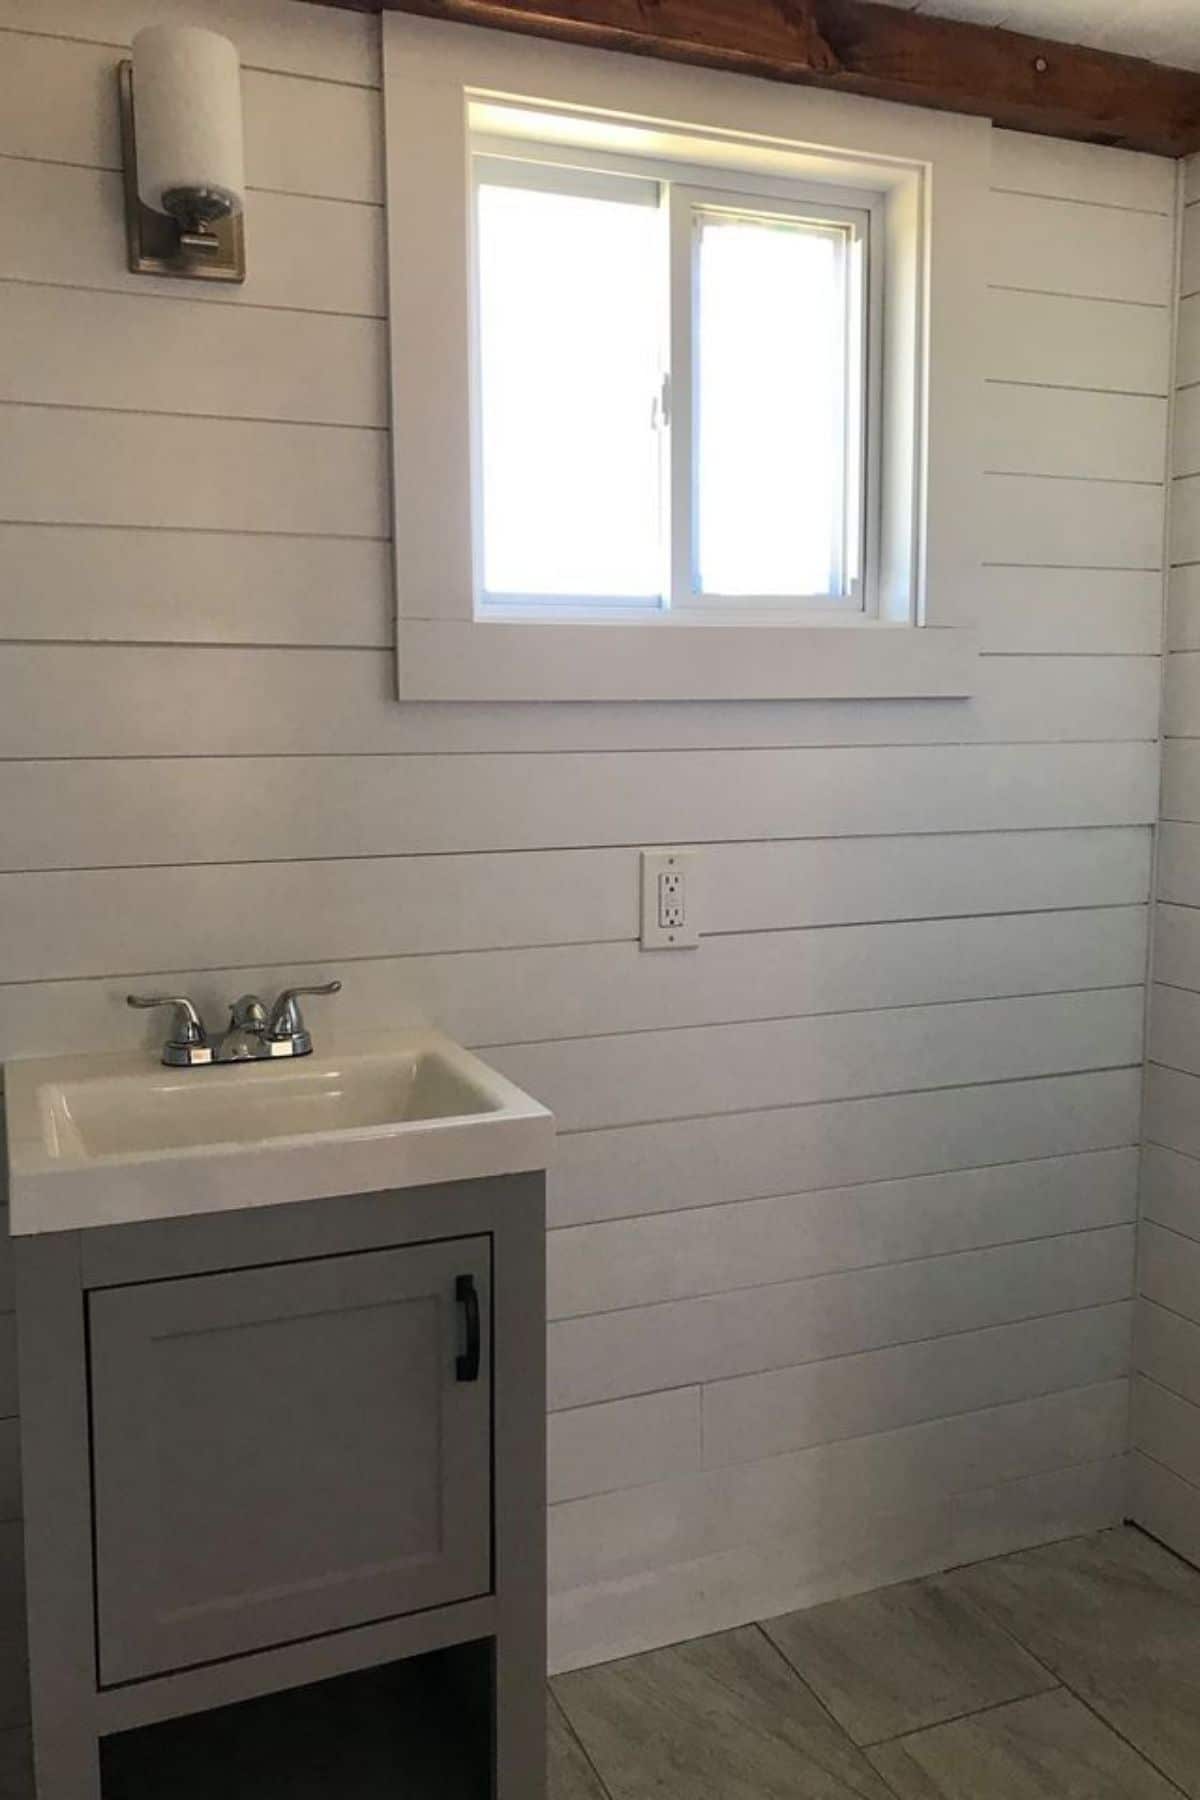 Gray cabinet with white sink above against white shiplap walls